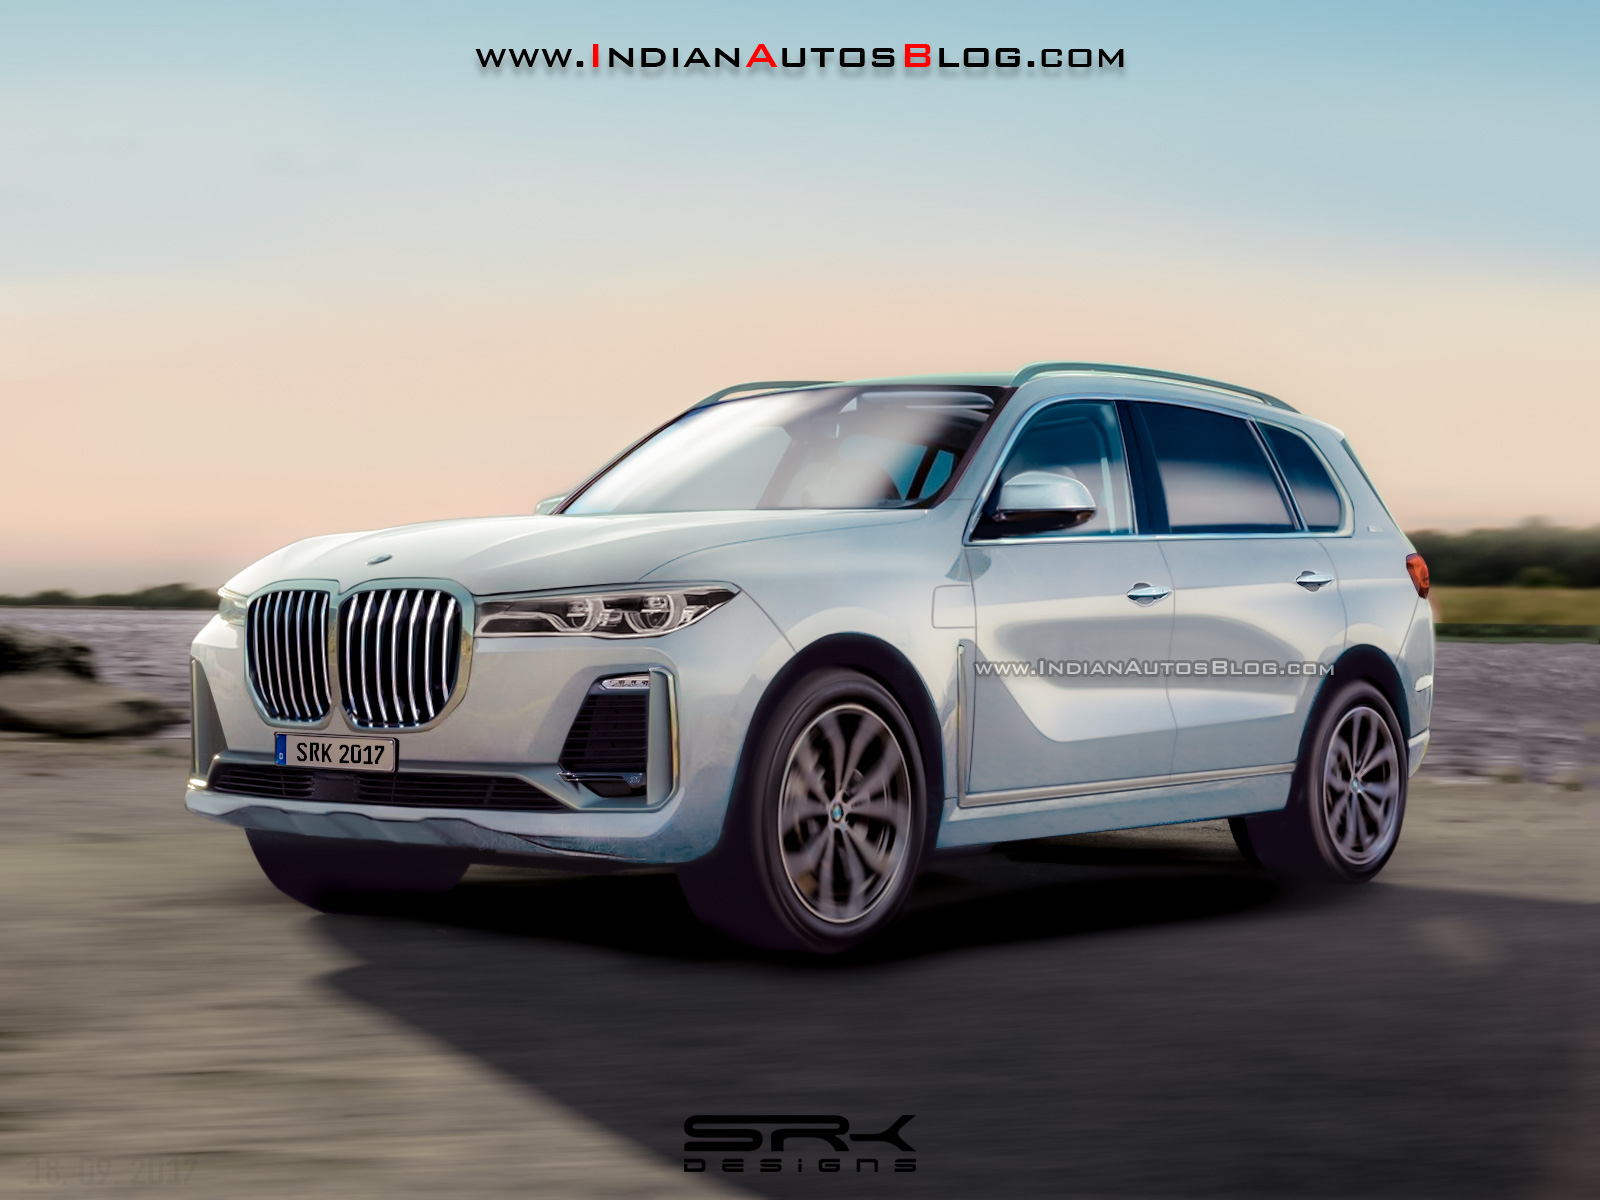 Bmw X7 Imagined In Production Guise Rendering